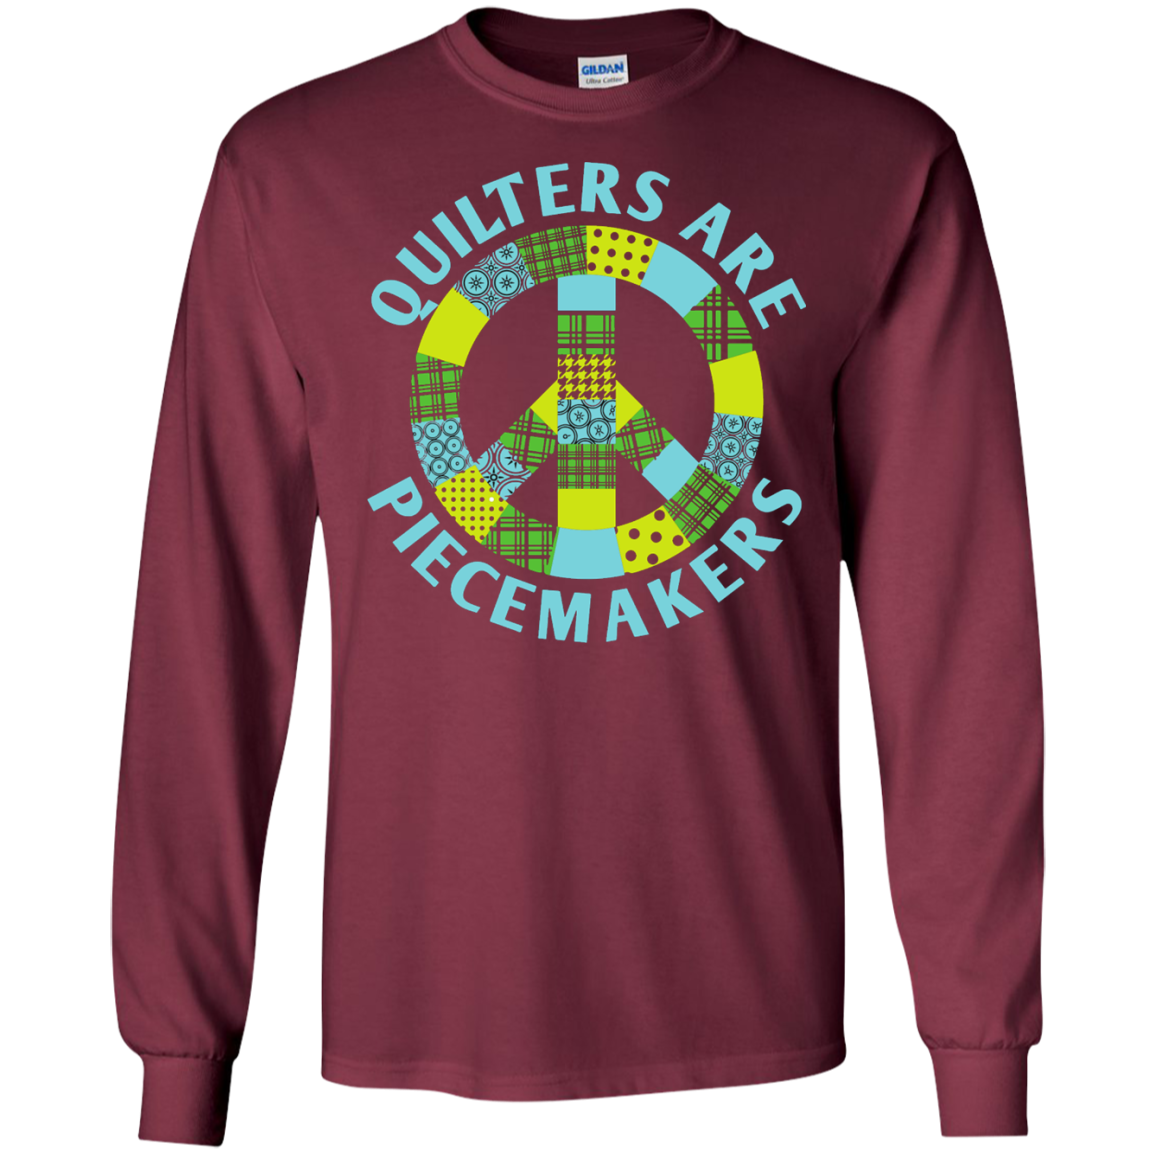 Quilters are Piecemakers Long Sleeve Ultra Cotton T-Shirt - Crafter4Life - 7